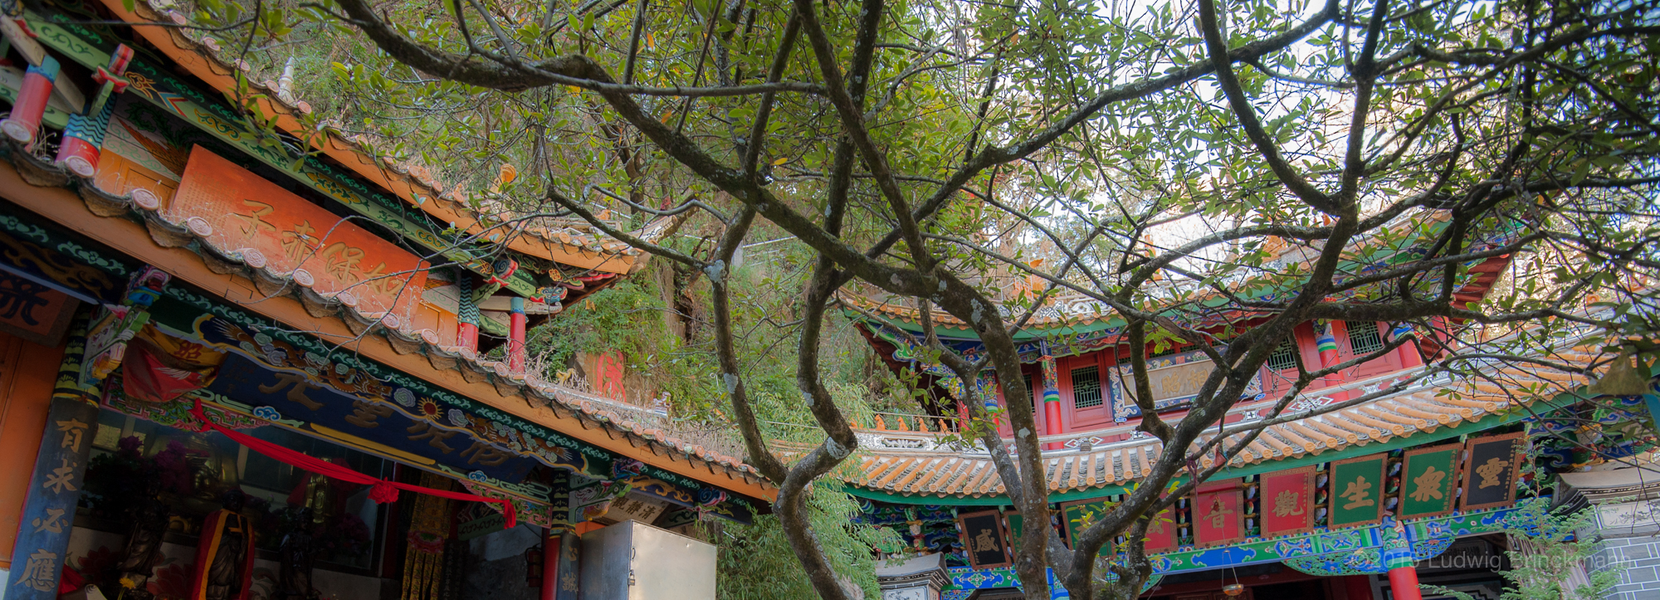 Picture: Lingyuan Temple 灵源寺 is an old Guanyin shrine near Yongsheng town, witness to the long Han history of this outpost of the Chinese empire.